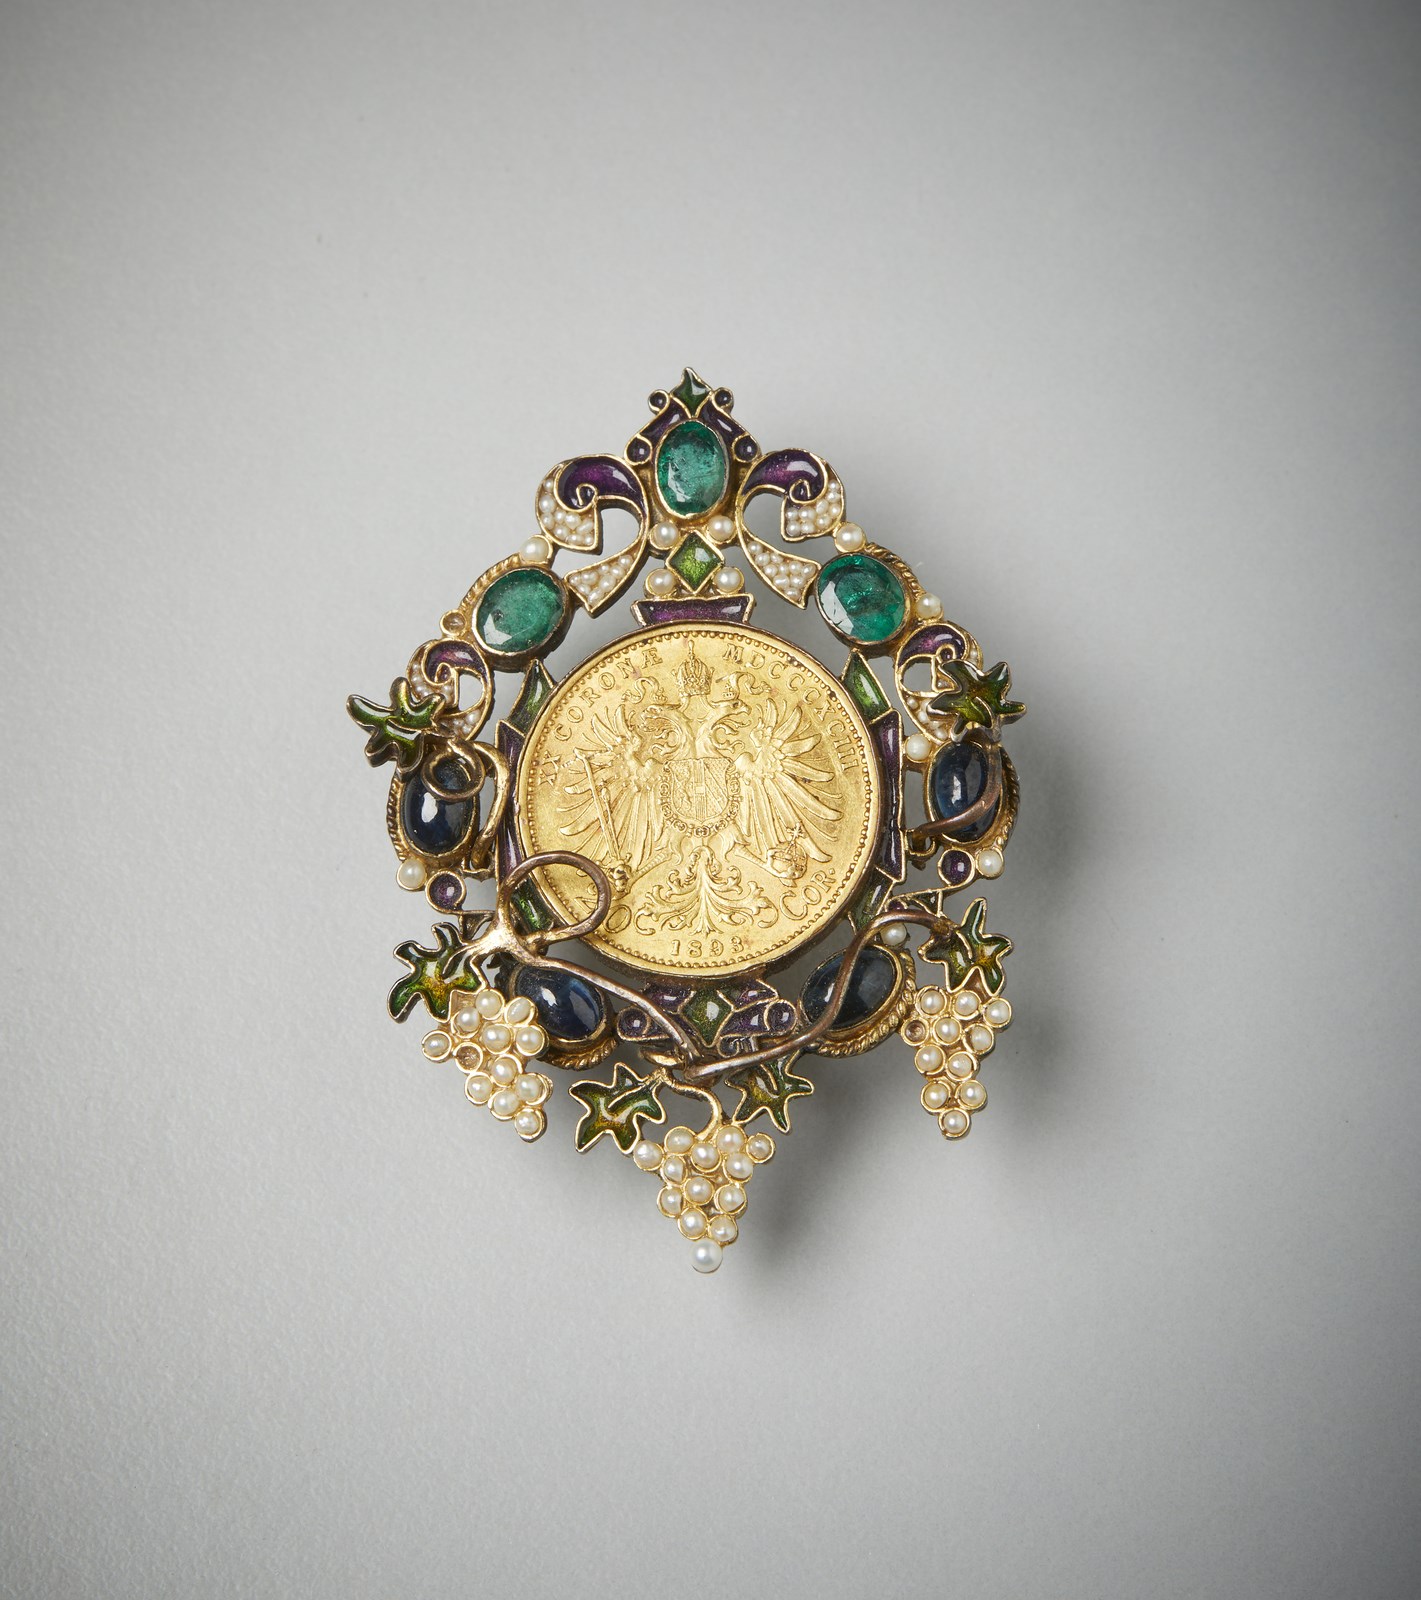 Silver brooch of fine manufacture signed Percossi Papi Roma, depicting vine shoots surrounded by three oval emeralds of about 1.5 carats total.  (. )